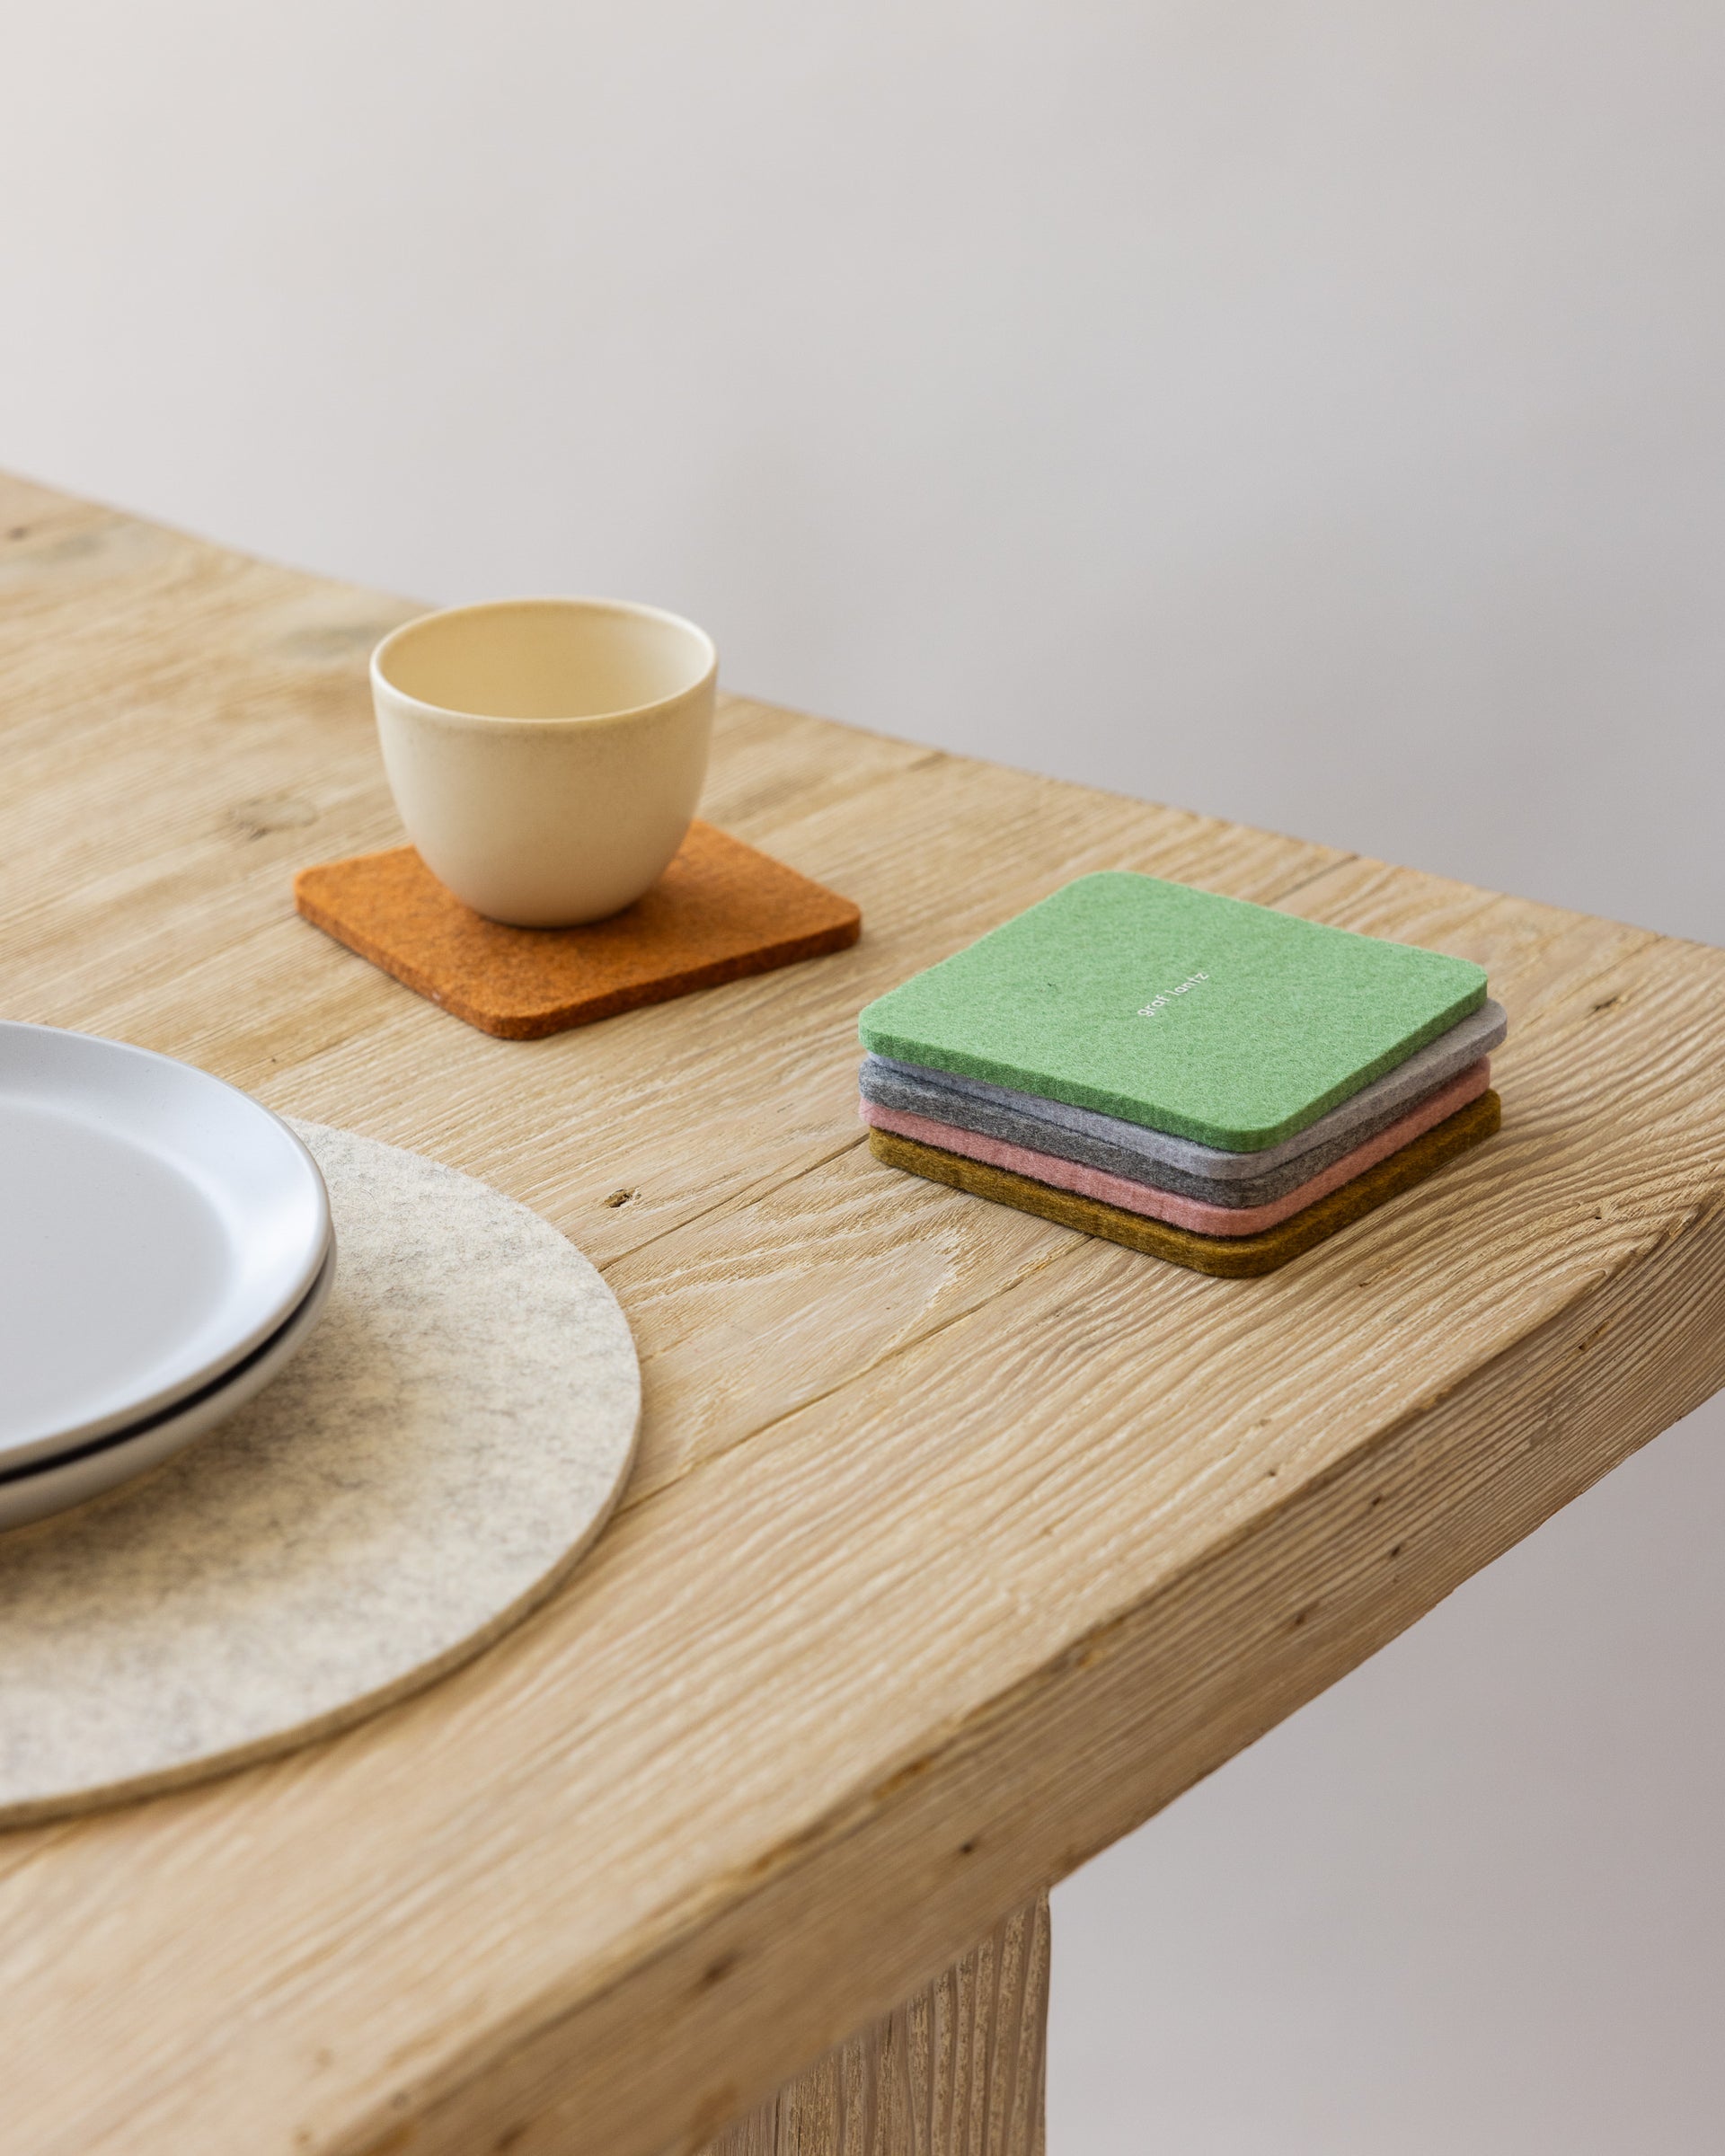 Stack of five felt coasters in different colors on a wooden table next to a white placemat, two stacked white plates, and a small beige mug on a coaster